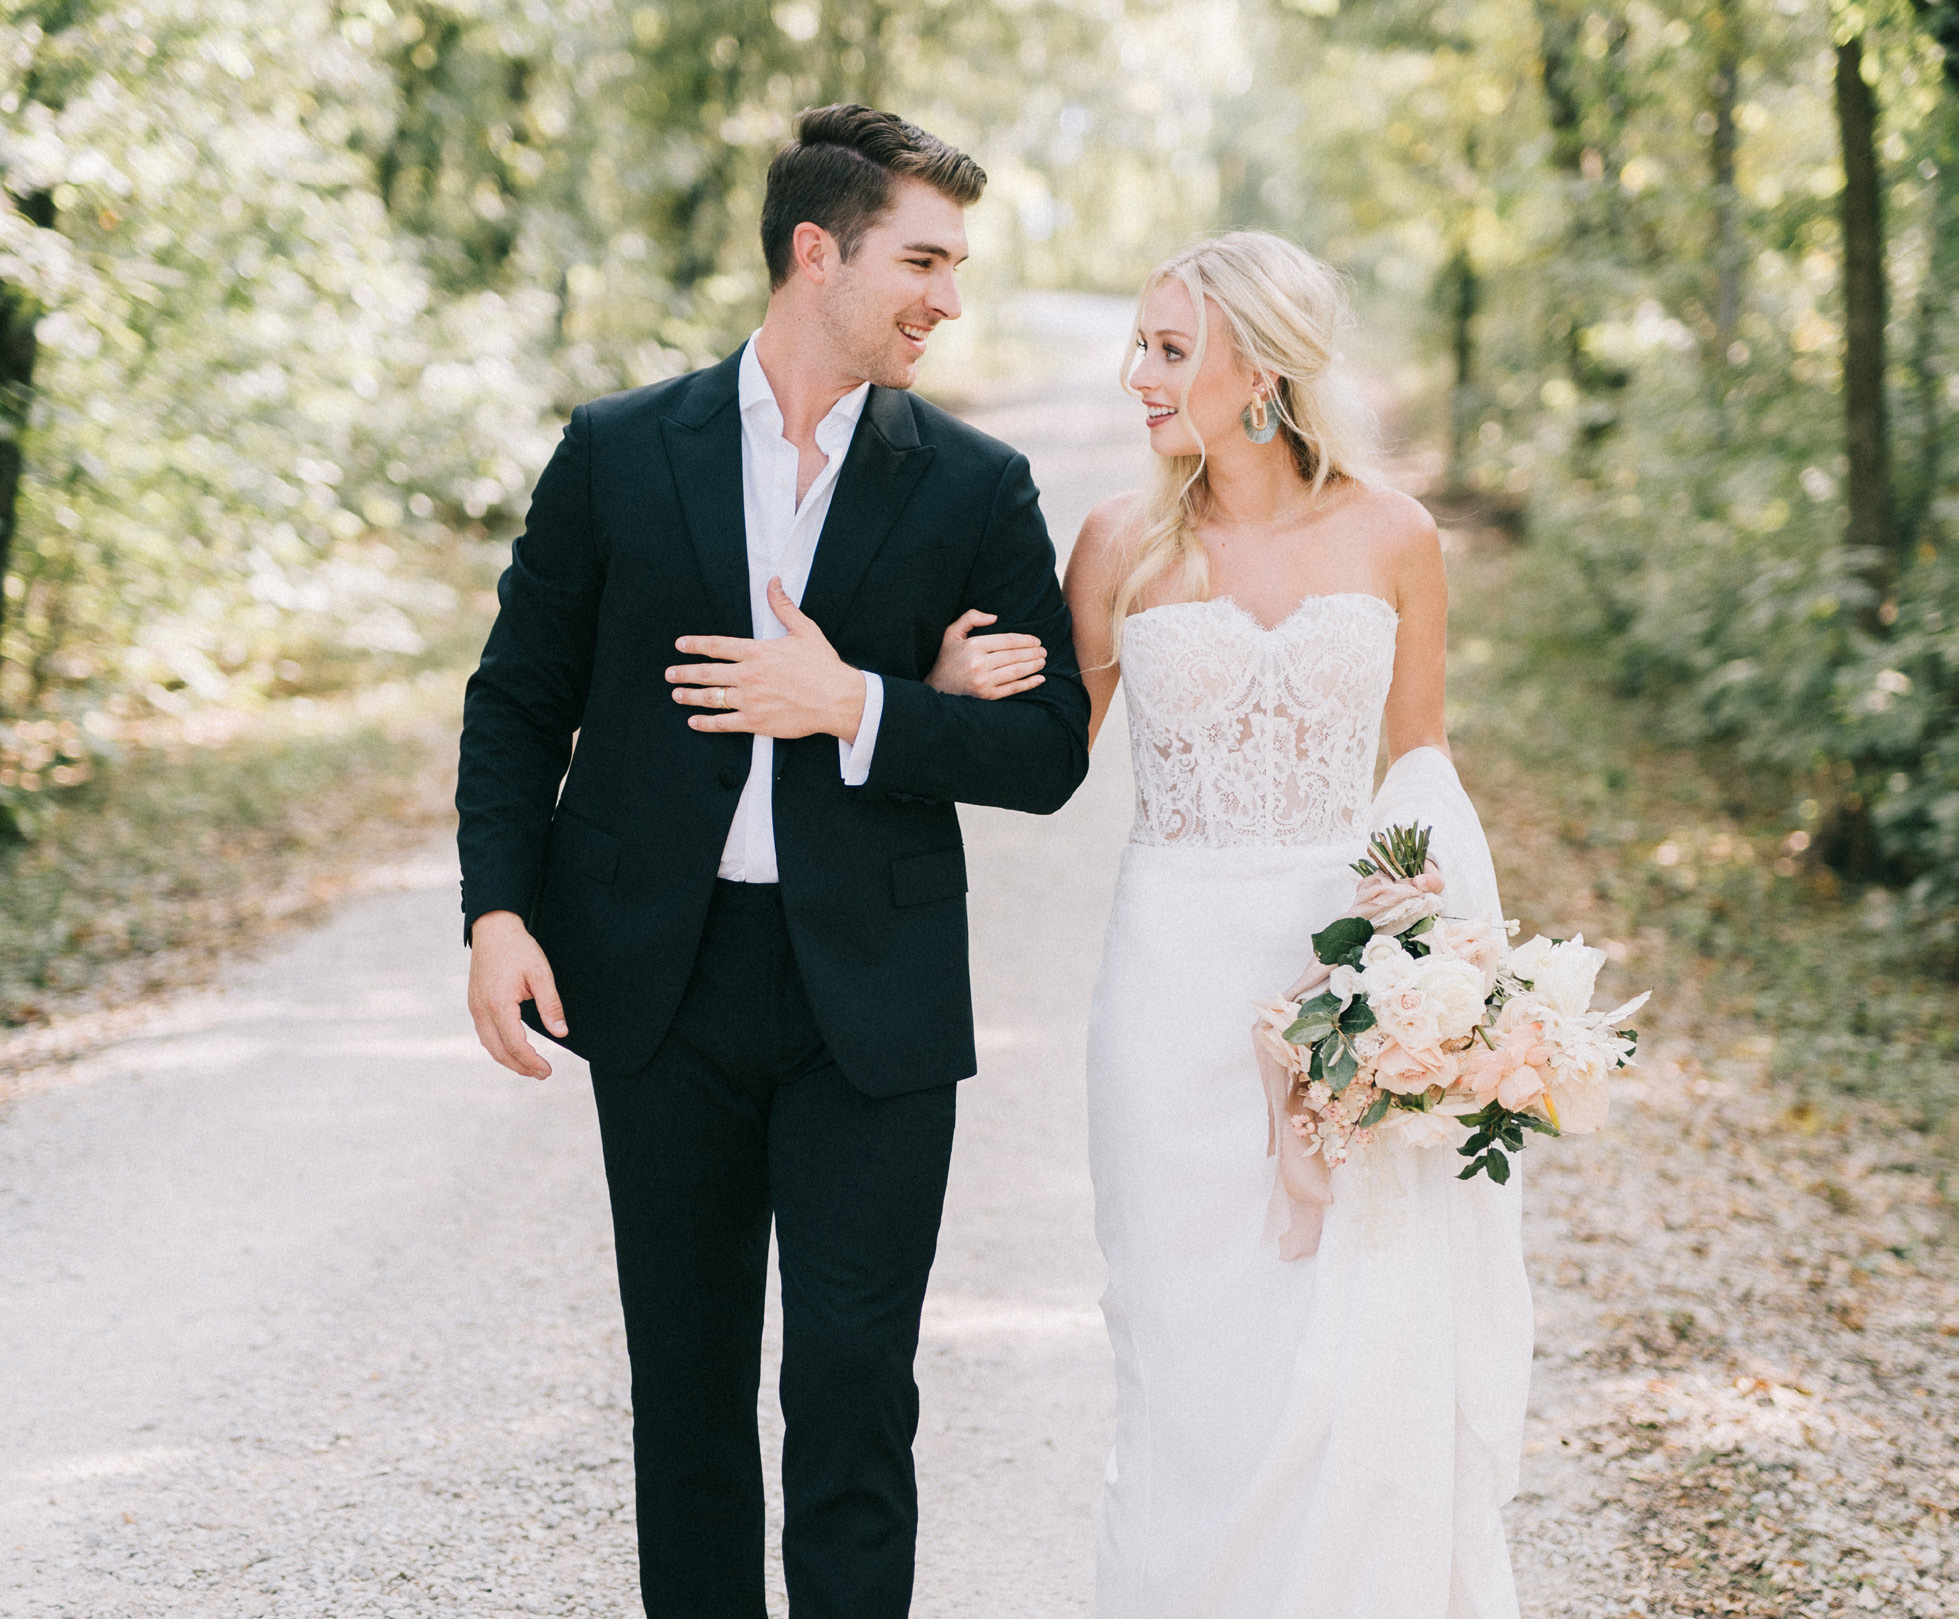 Vows that Wow – Dallas Wedding – Tiffany and Anthony